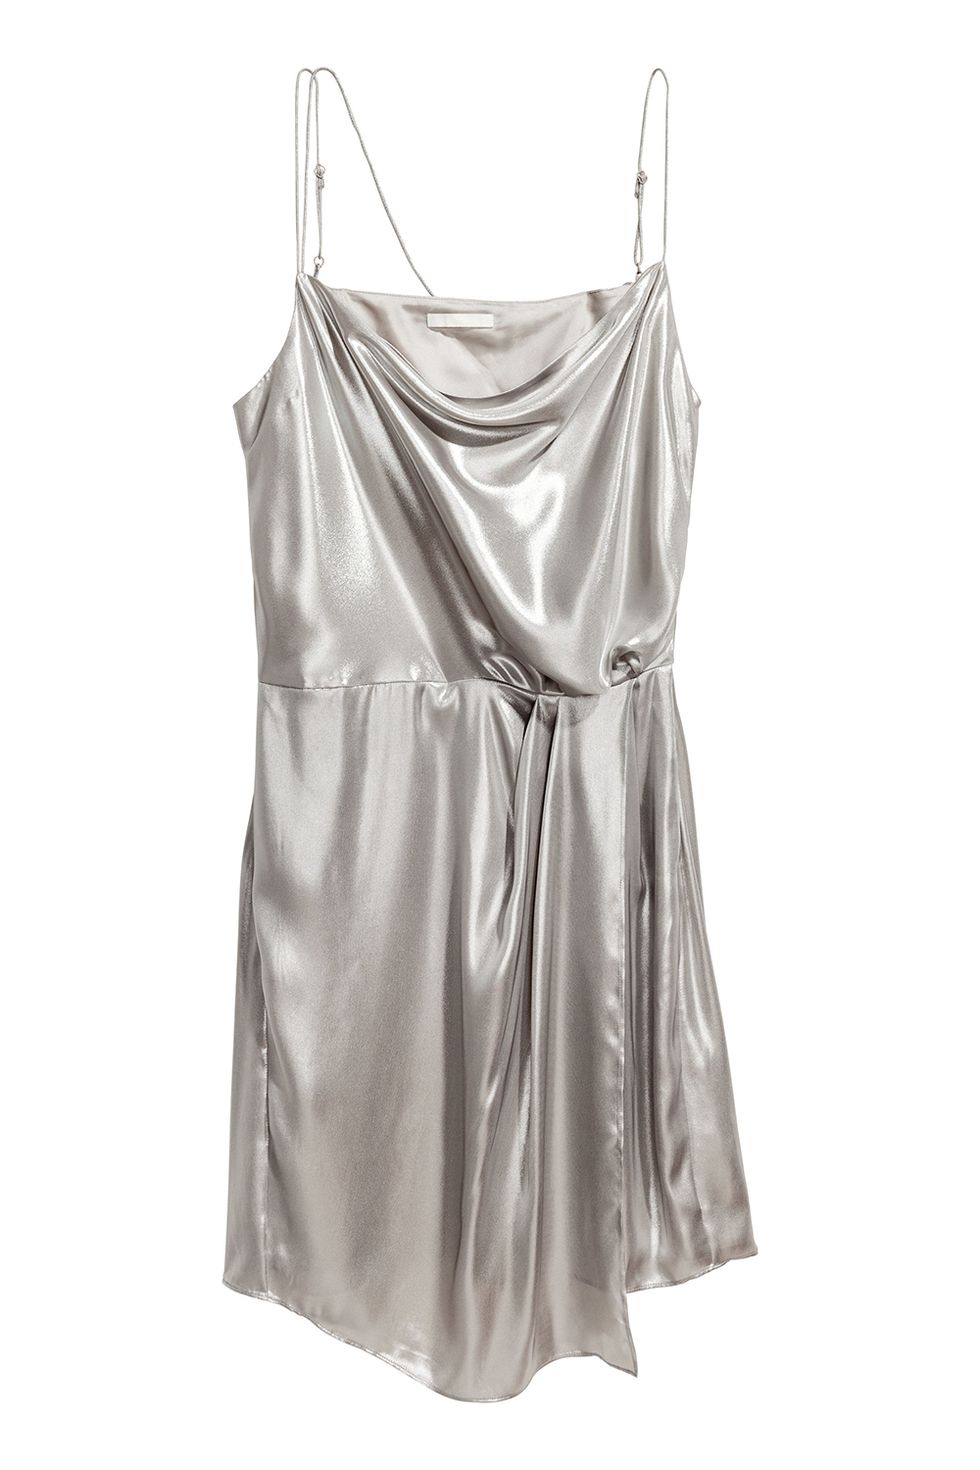 Clothing, White, Satin, Dress, Nightgown, Product, Silk, Day dress, Nightwear, camisoles, 